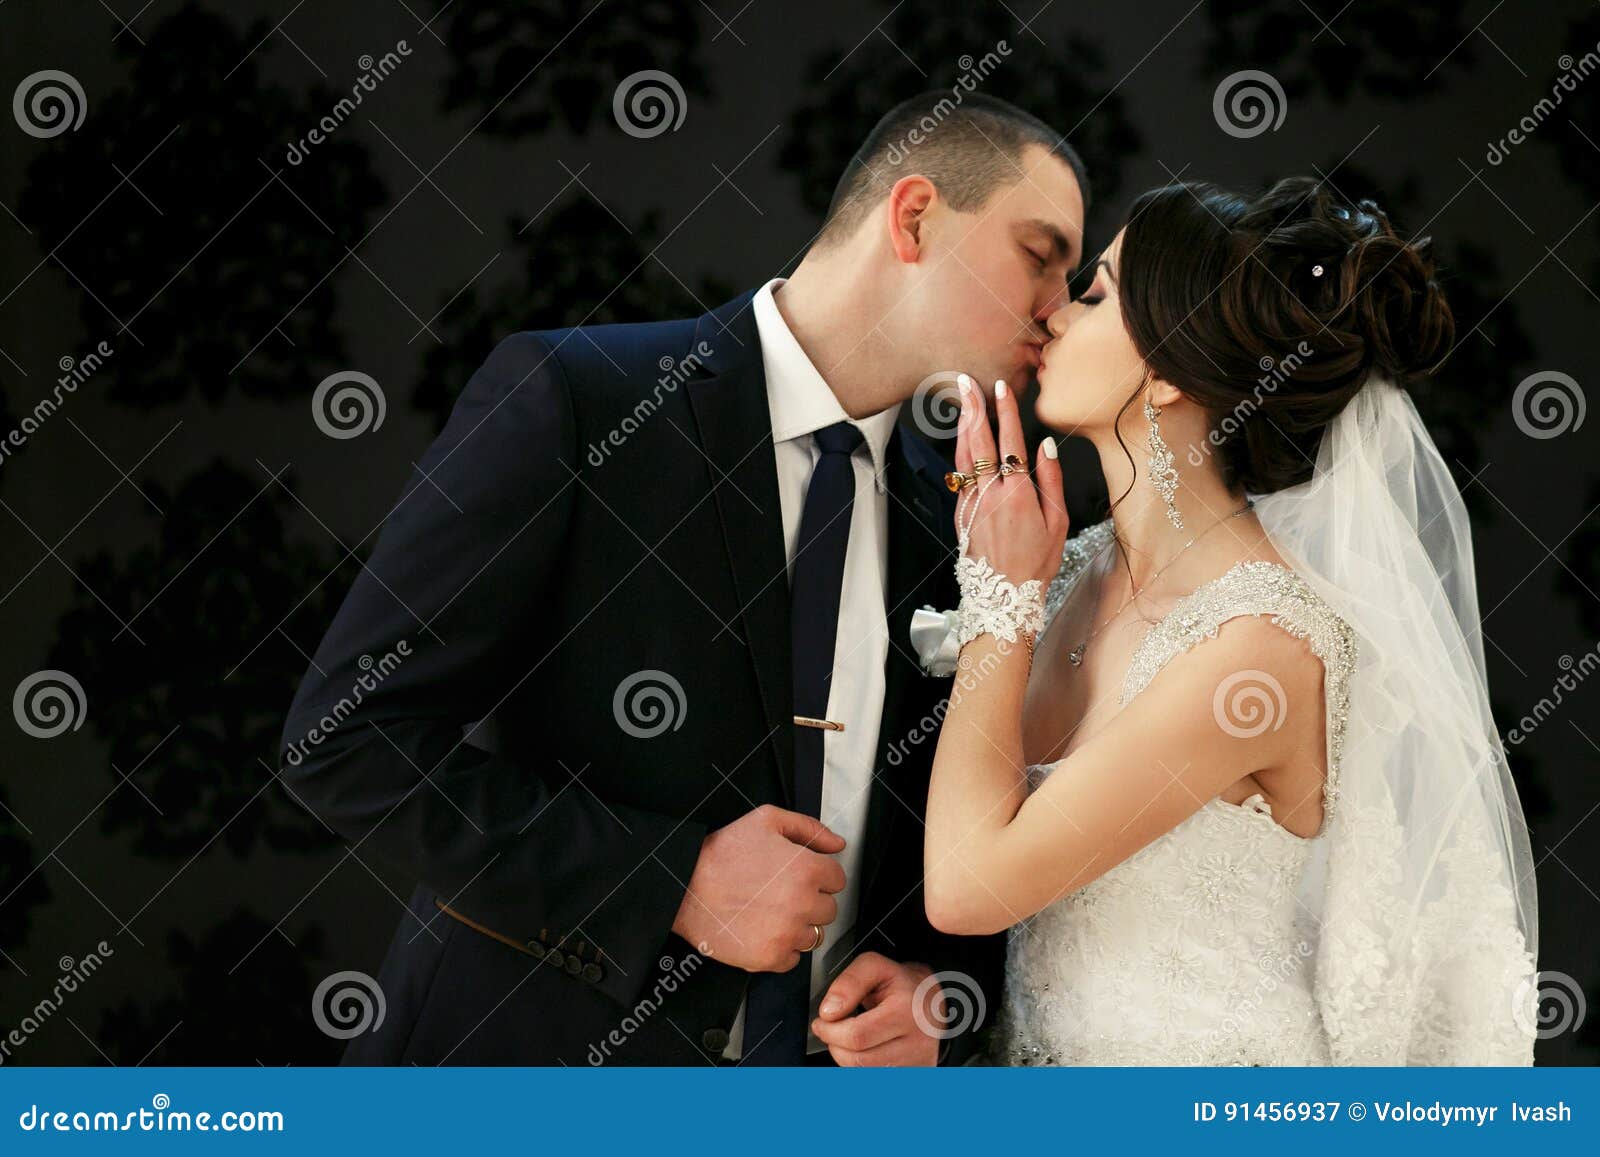 The Lovely Couple In Love Kissing Near Wall Stock Image Image Of Girl